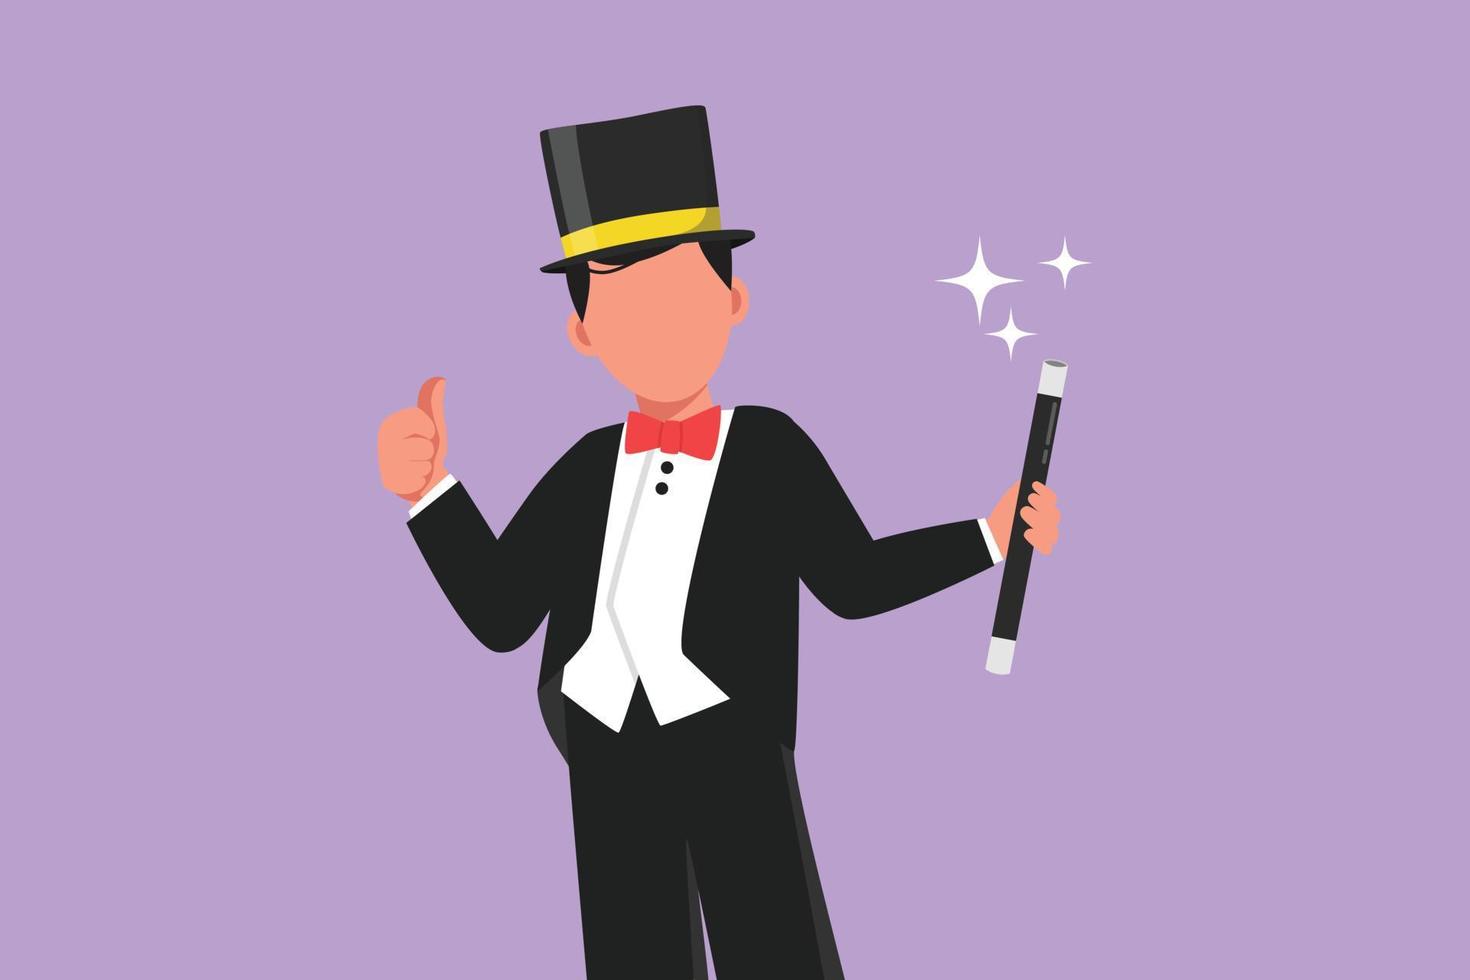 Graphic flat design drawing funny male magician in tuxedo suit with gesture thumbs up wearing hat and holding magic stick ready to entertain audience in circus show. Cartoon style vector illustration